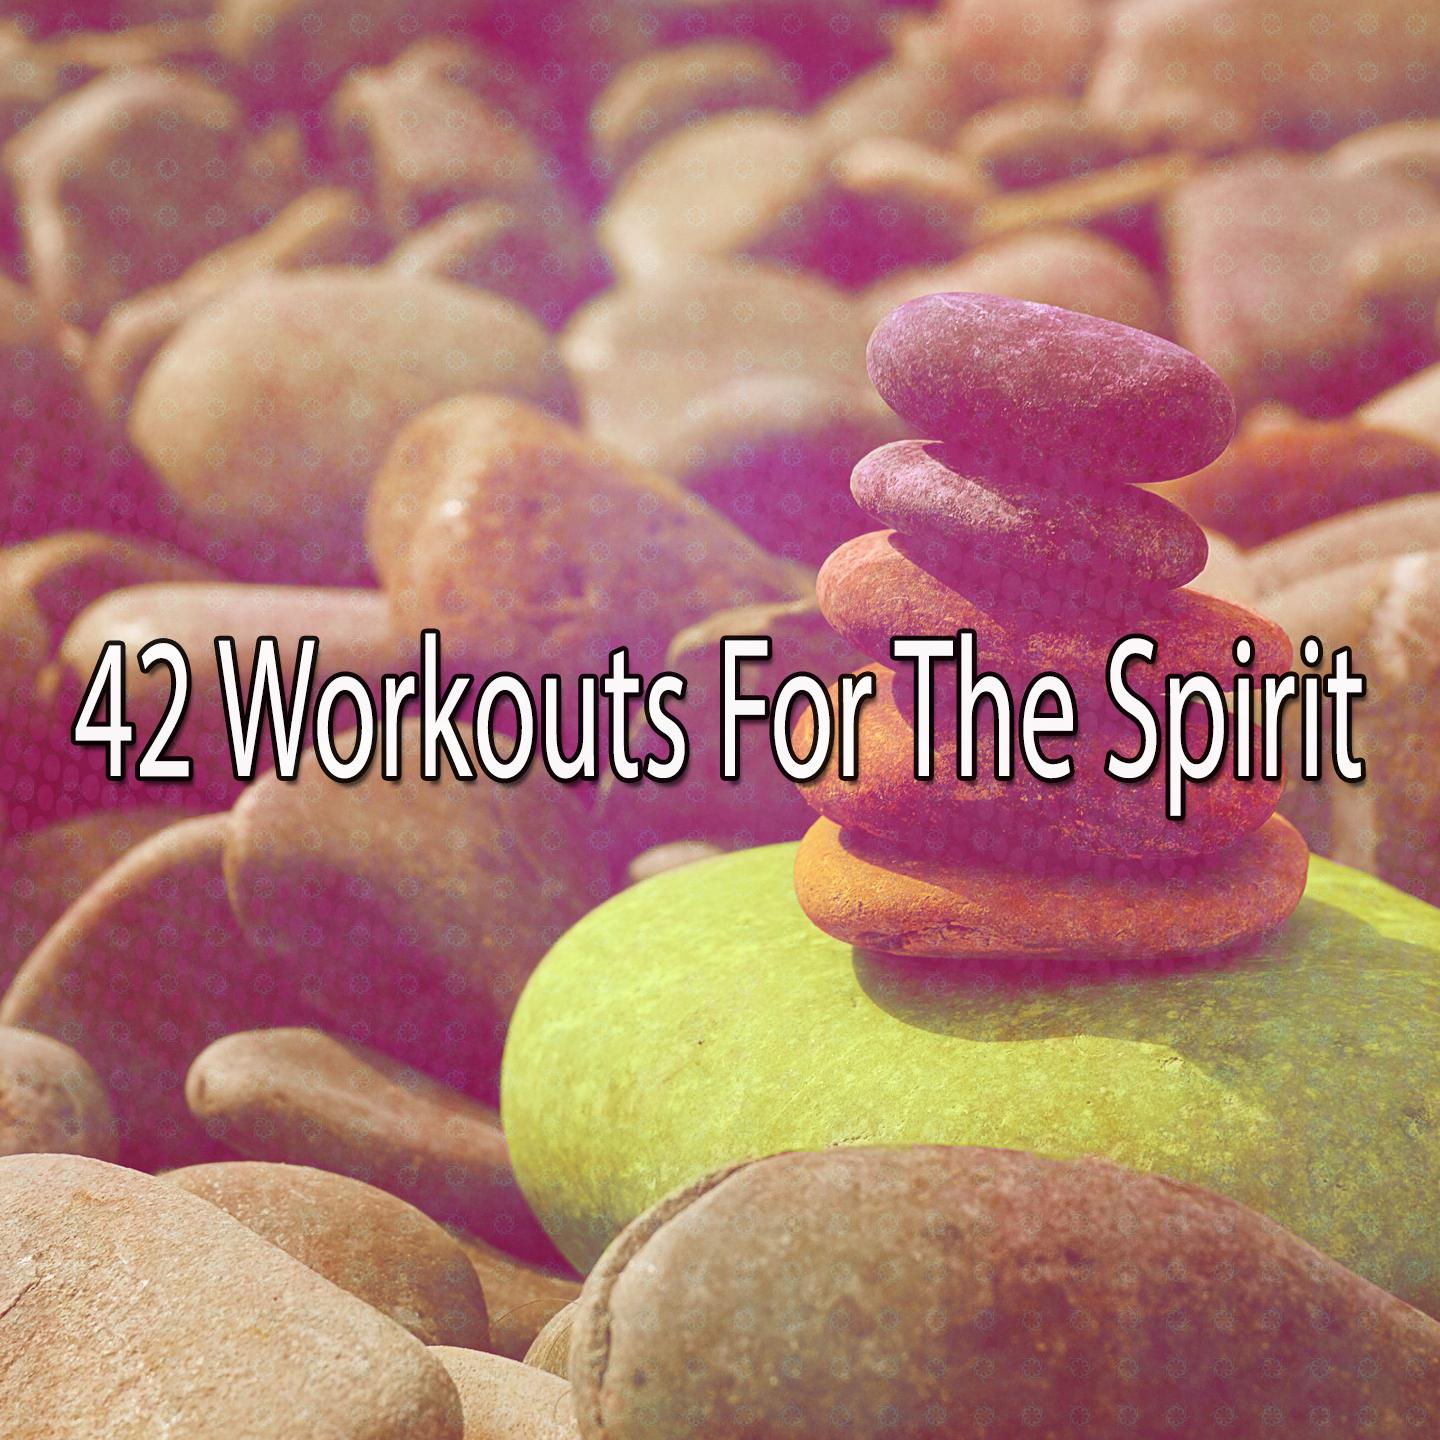 42 Workouts for the Spirit